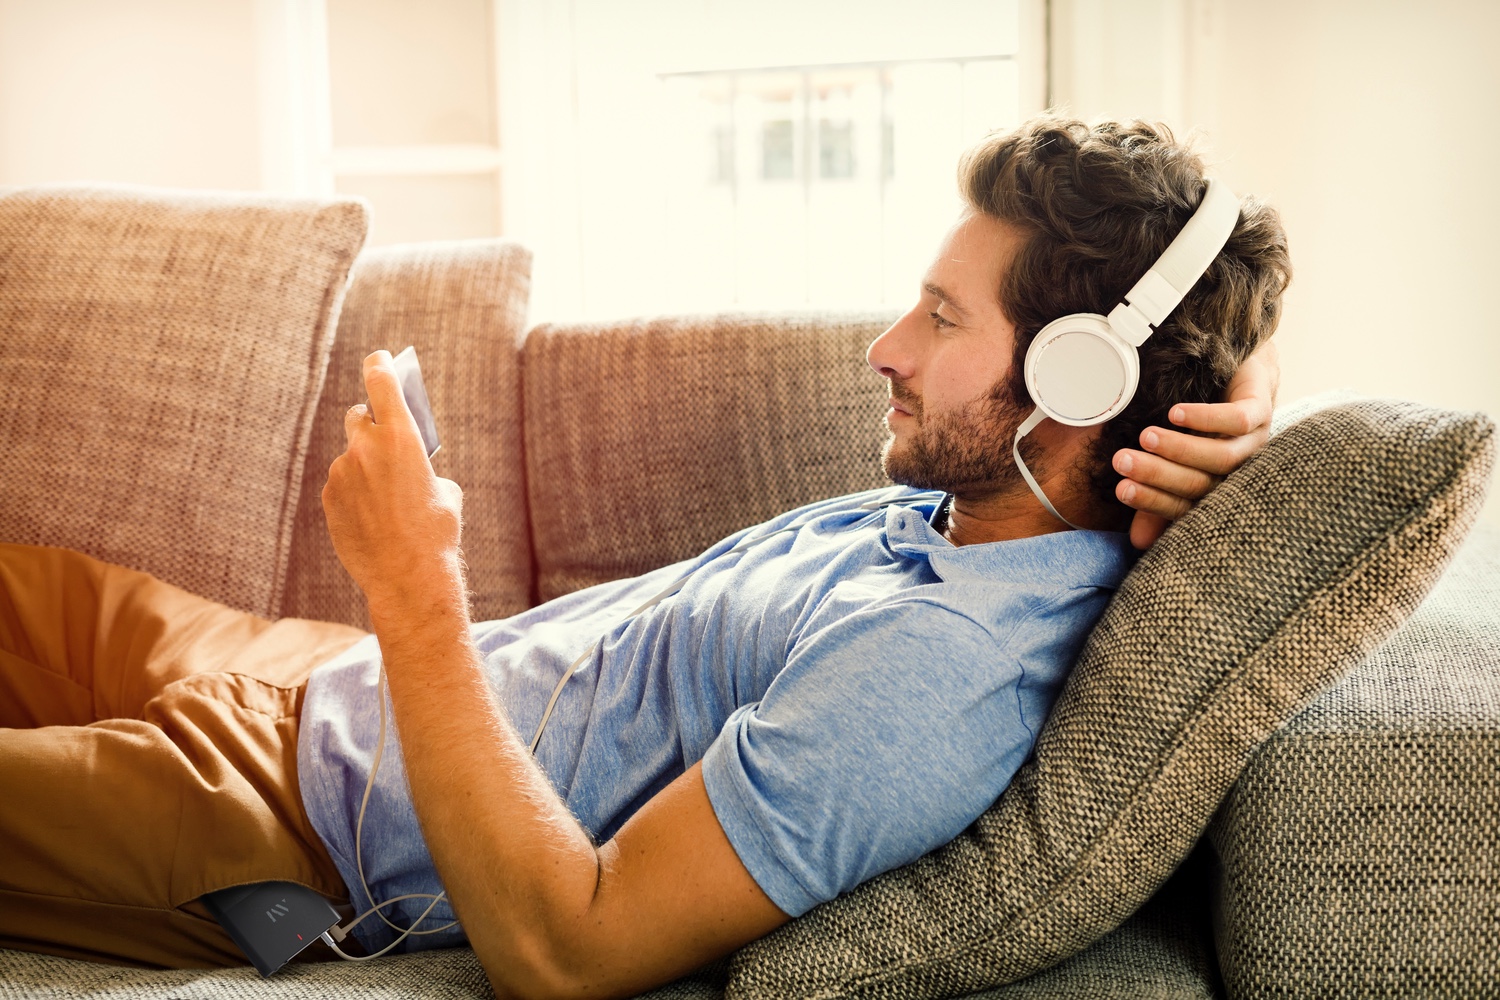 aftermaster pro fixes tv movie audio issues man on couch watches a mobile phone